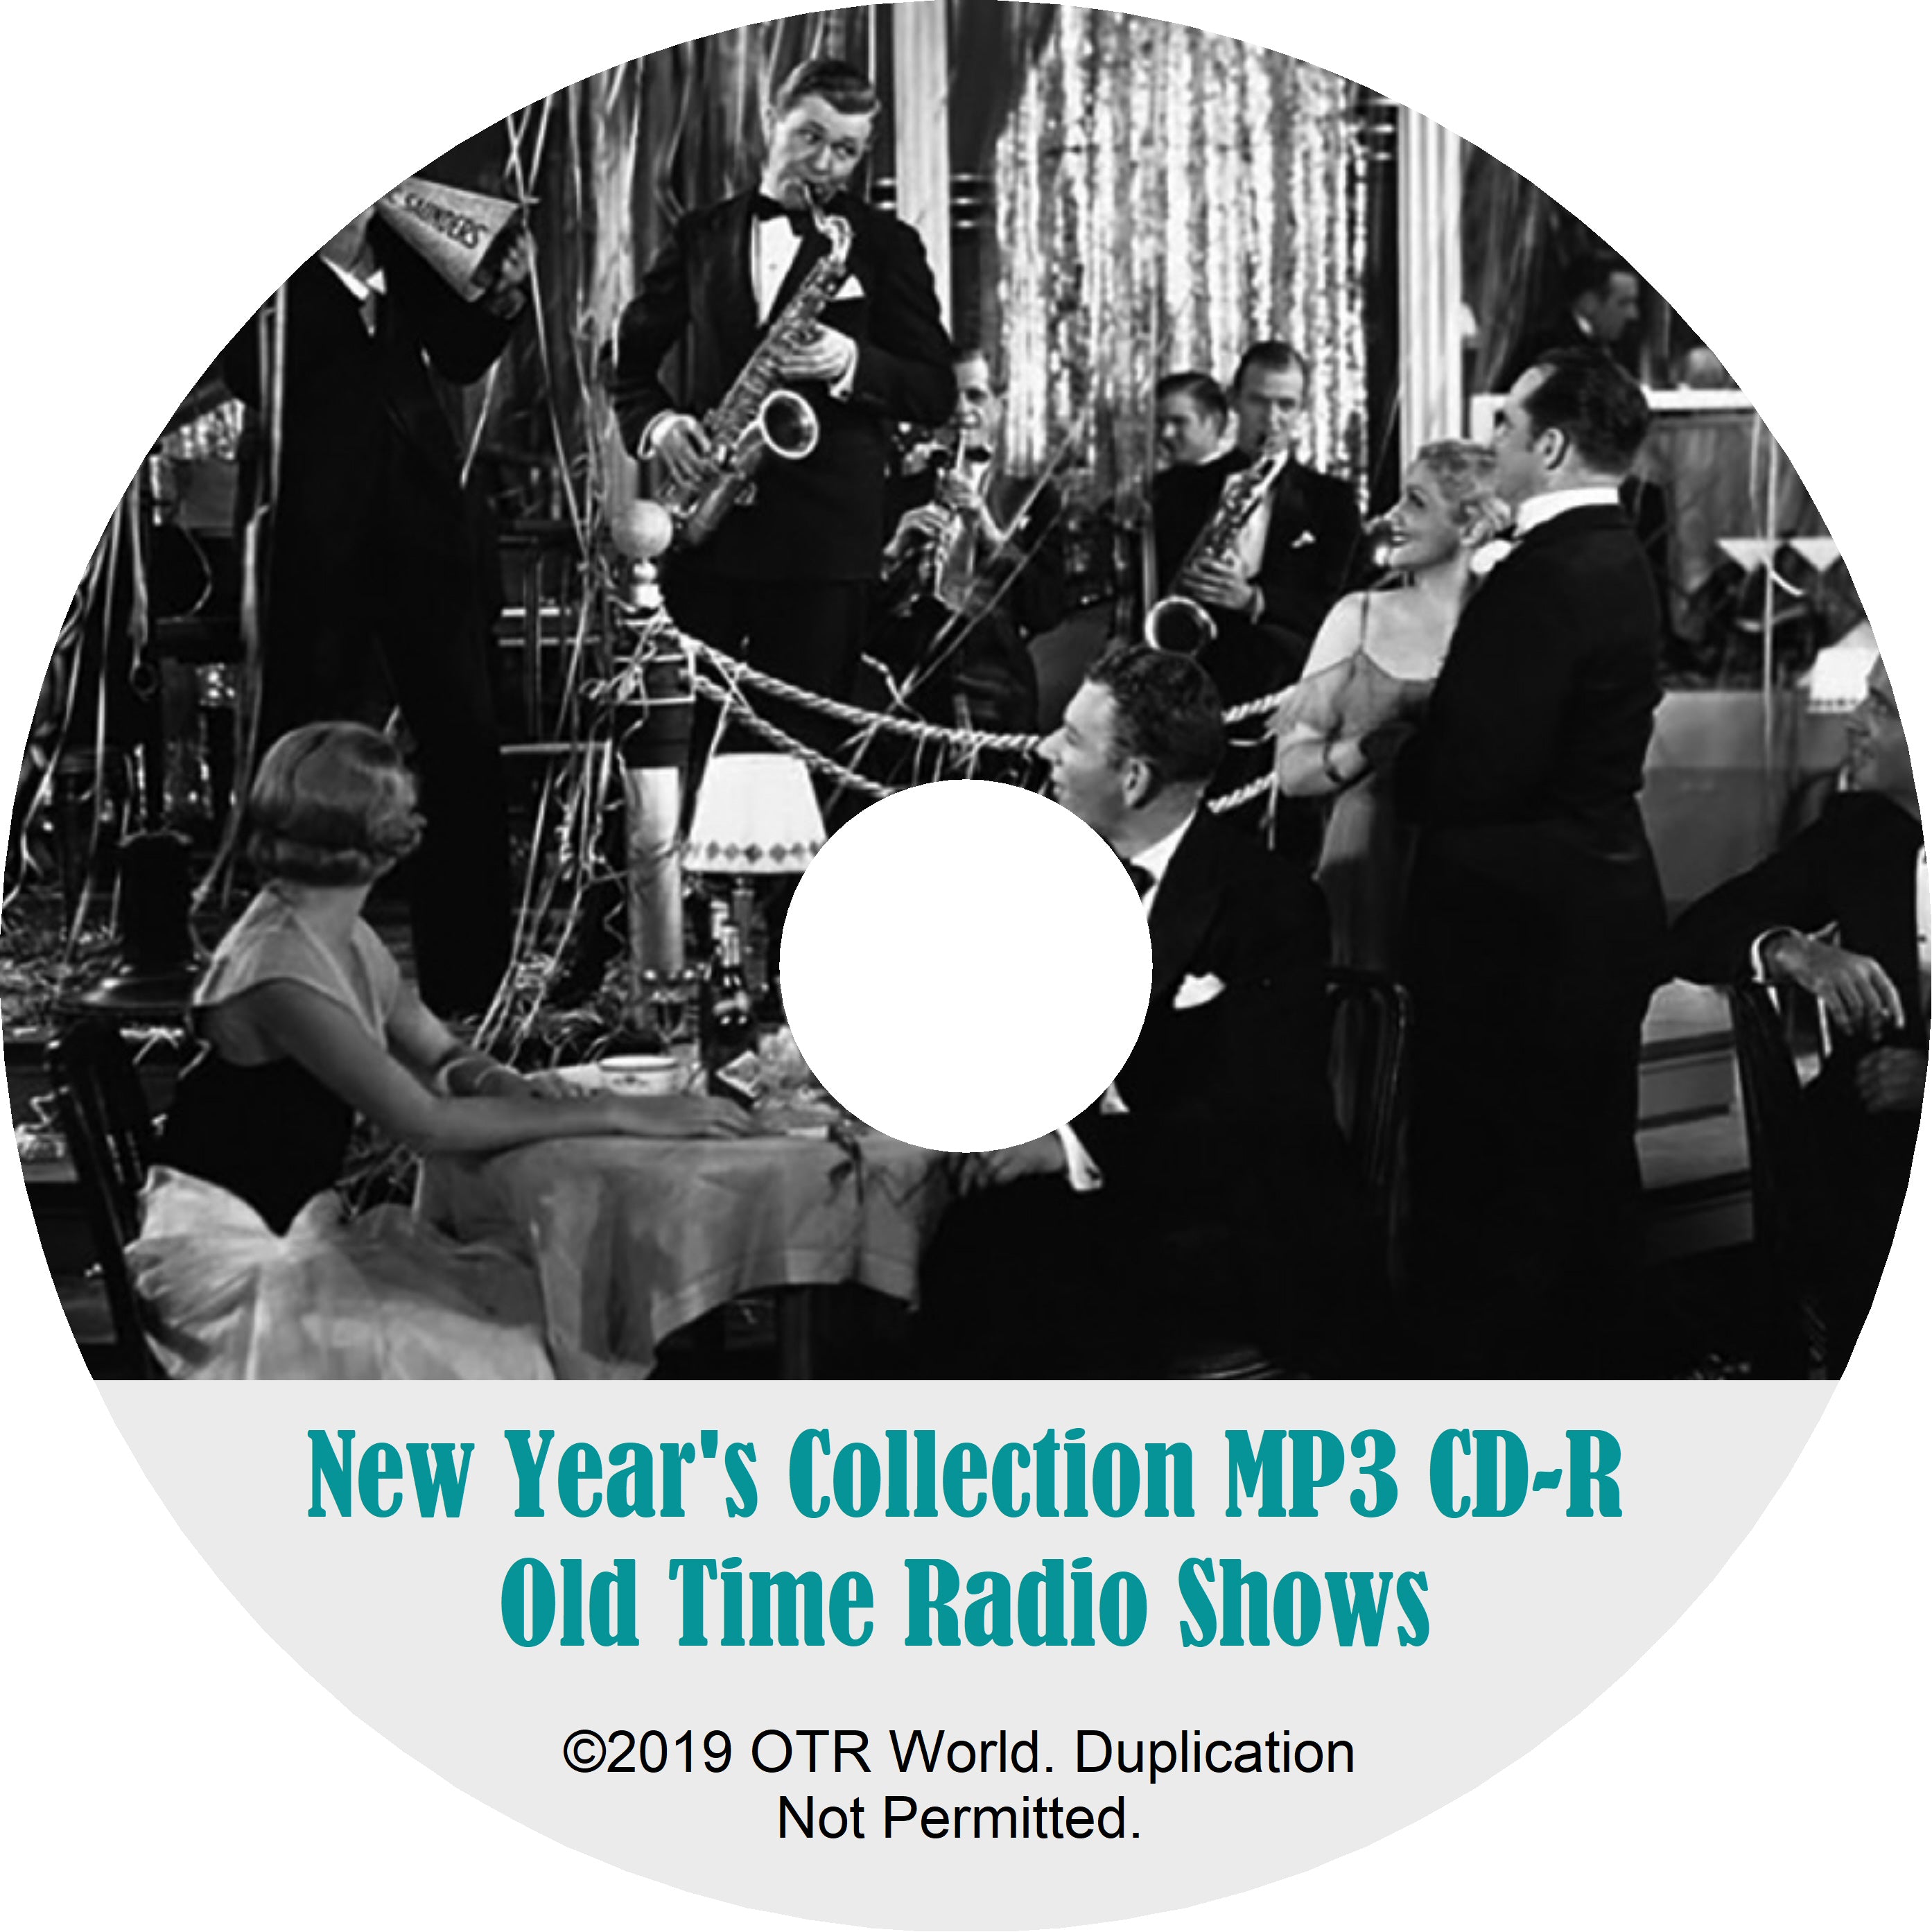 New Year's Collection OTR Old Time Radio Show MP3 On CD-R 85 Episodes